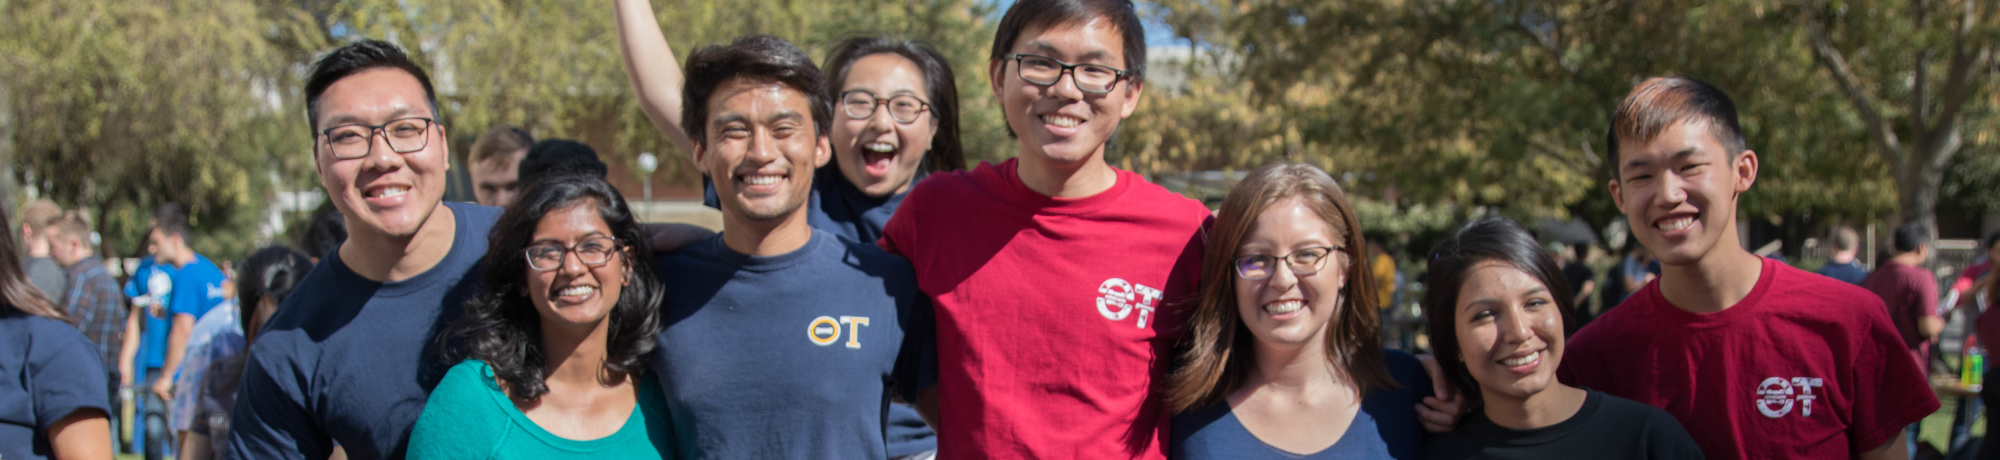 Students at the 2017 UC Davis College of Engineering Ice Cream Social